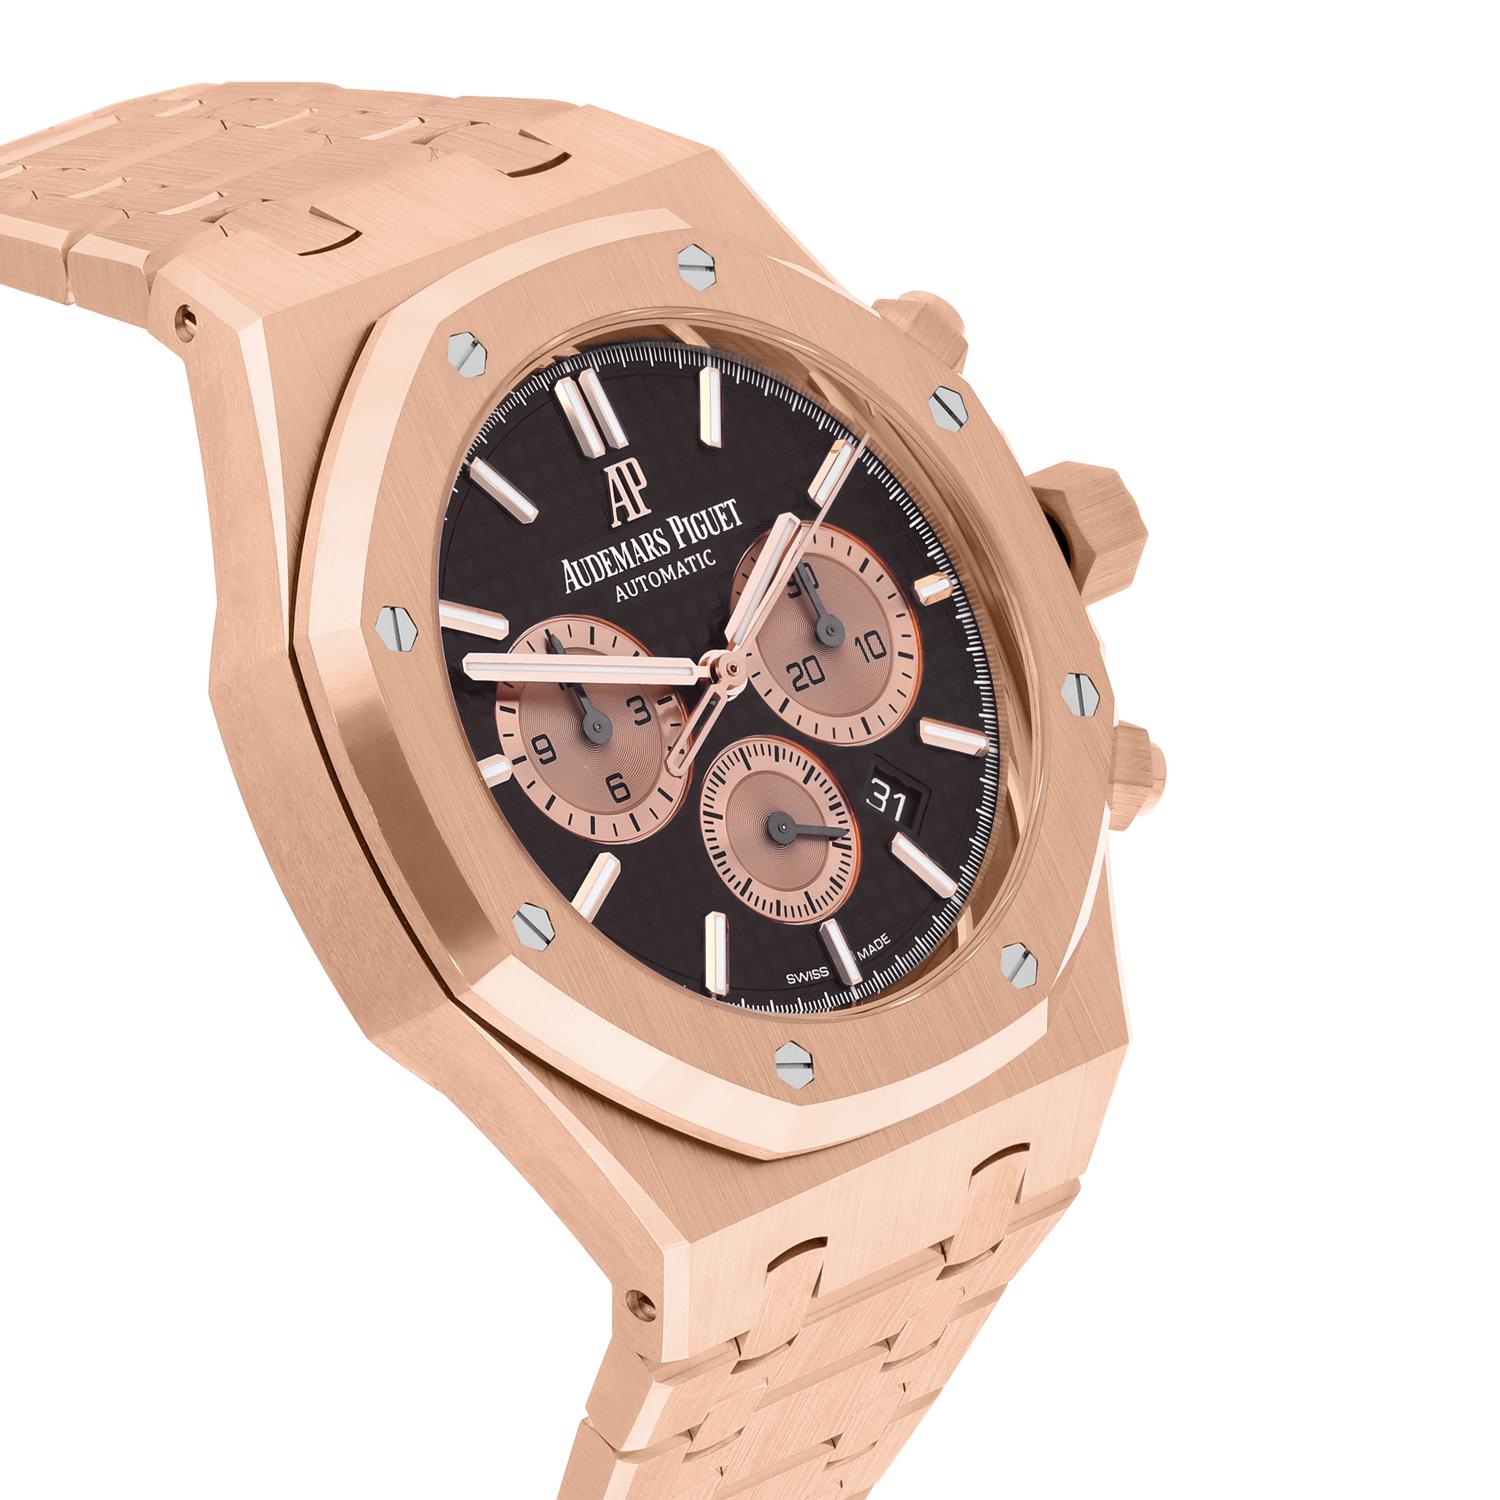 Audemars Piguet Royal Oak Chronograph Chocolate 26331OR.OO.1220OR.02 NEW For Sale 1